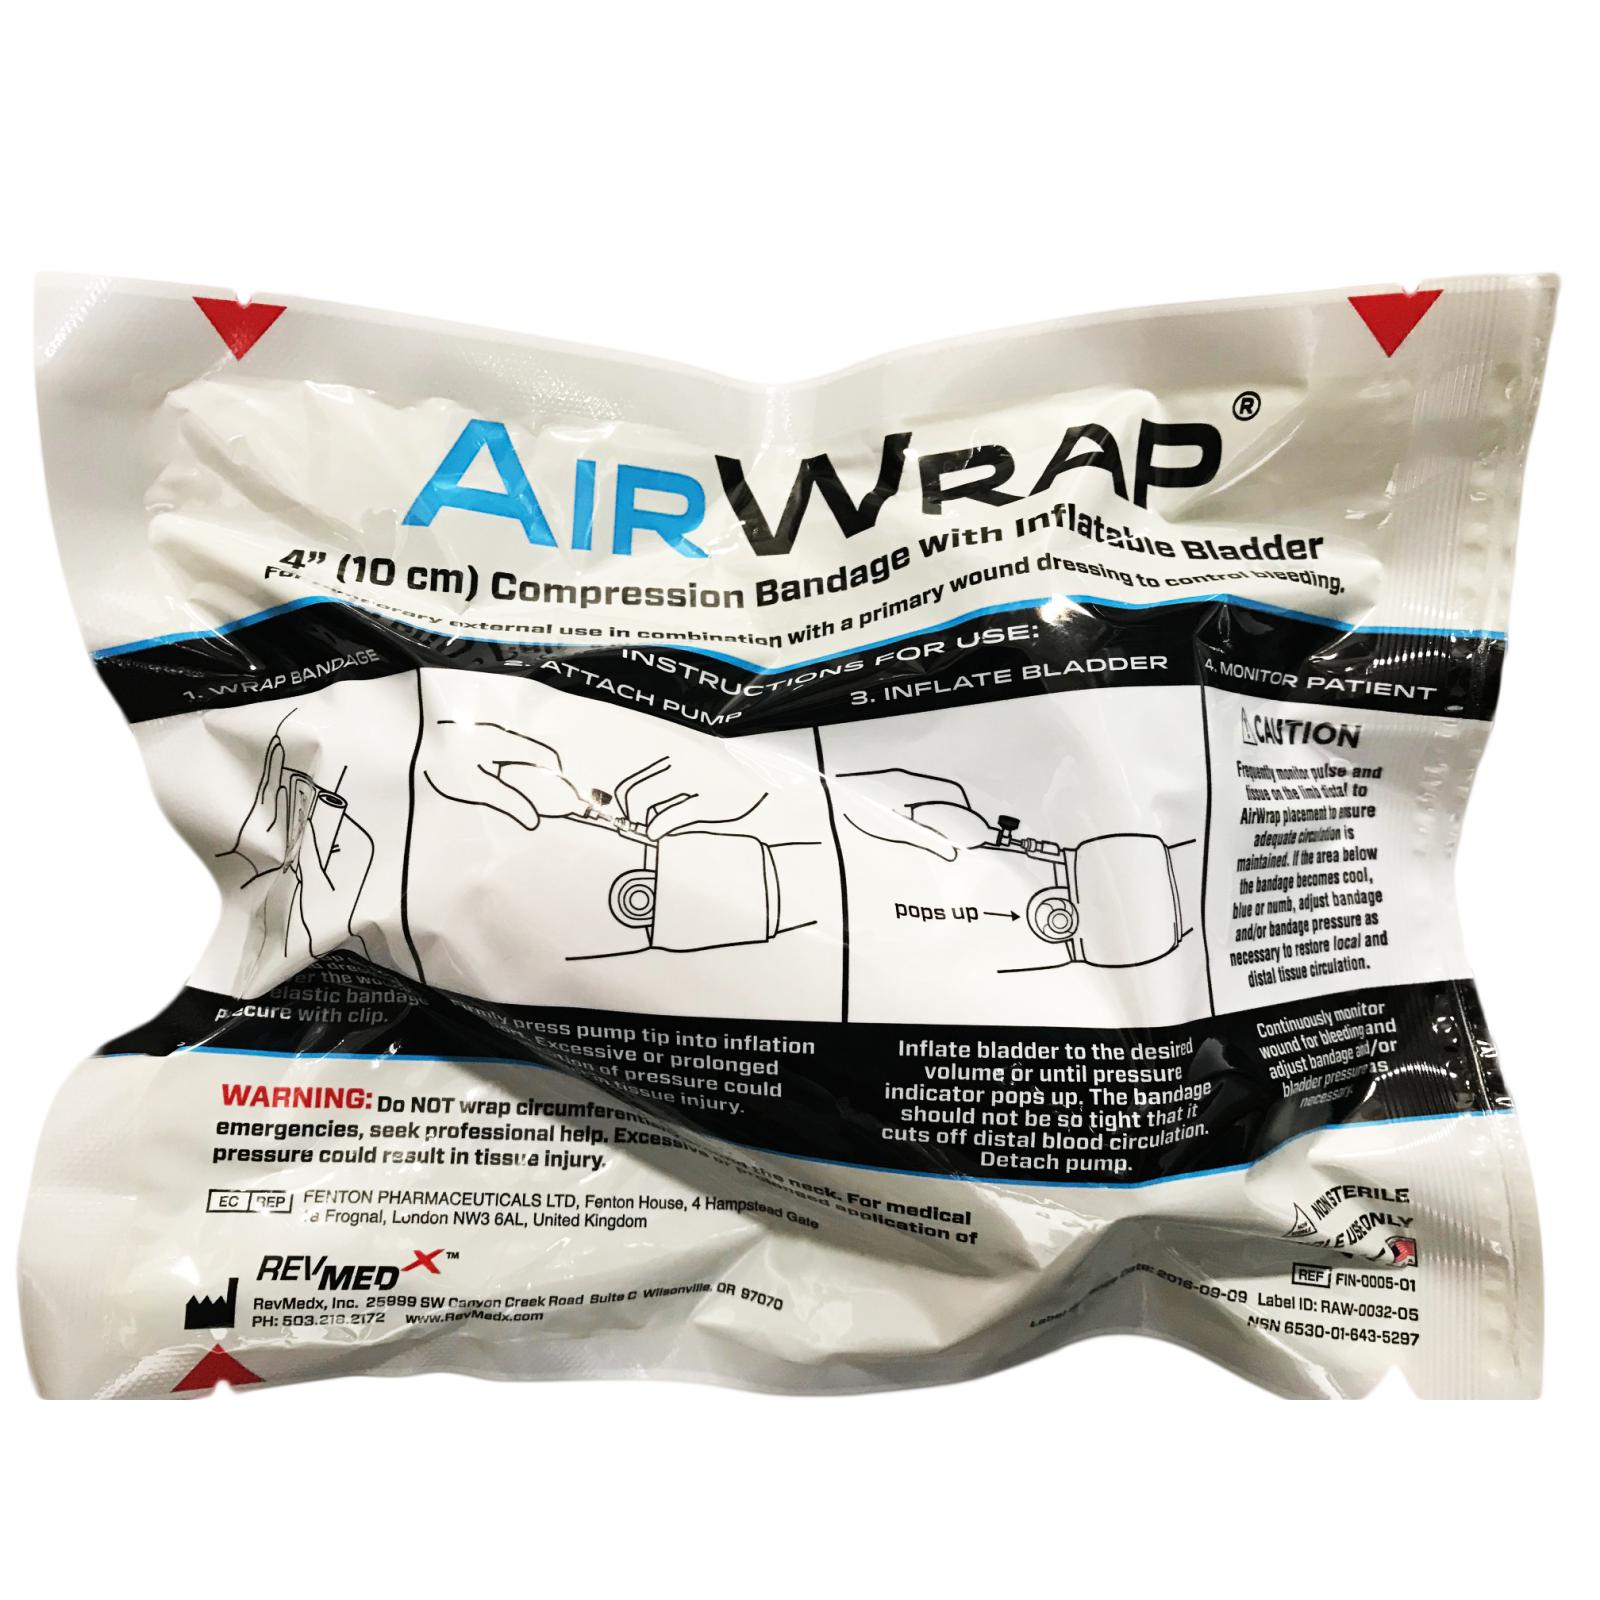 AirWrap 4 Compression Bandage w/ Inflatable Bladder – Integrated